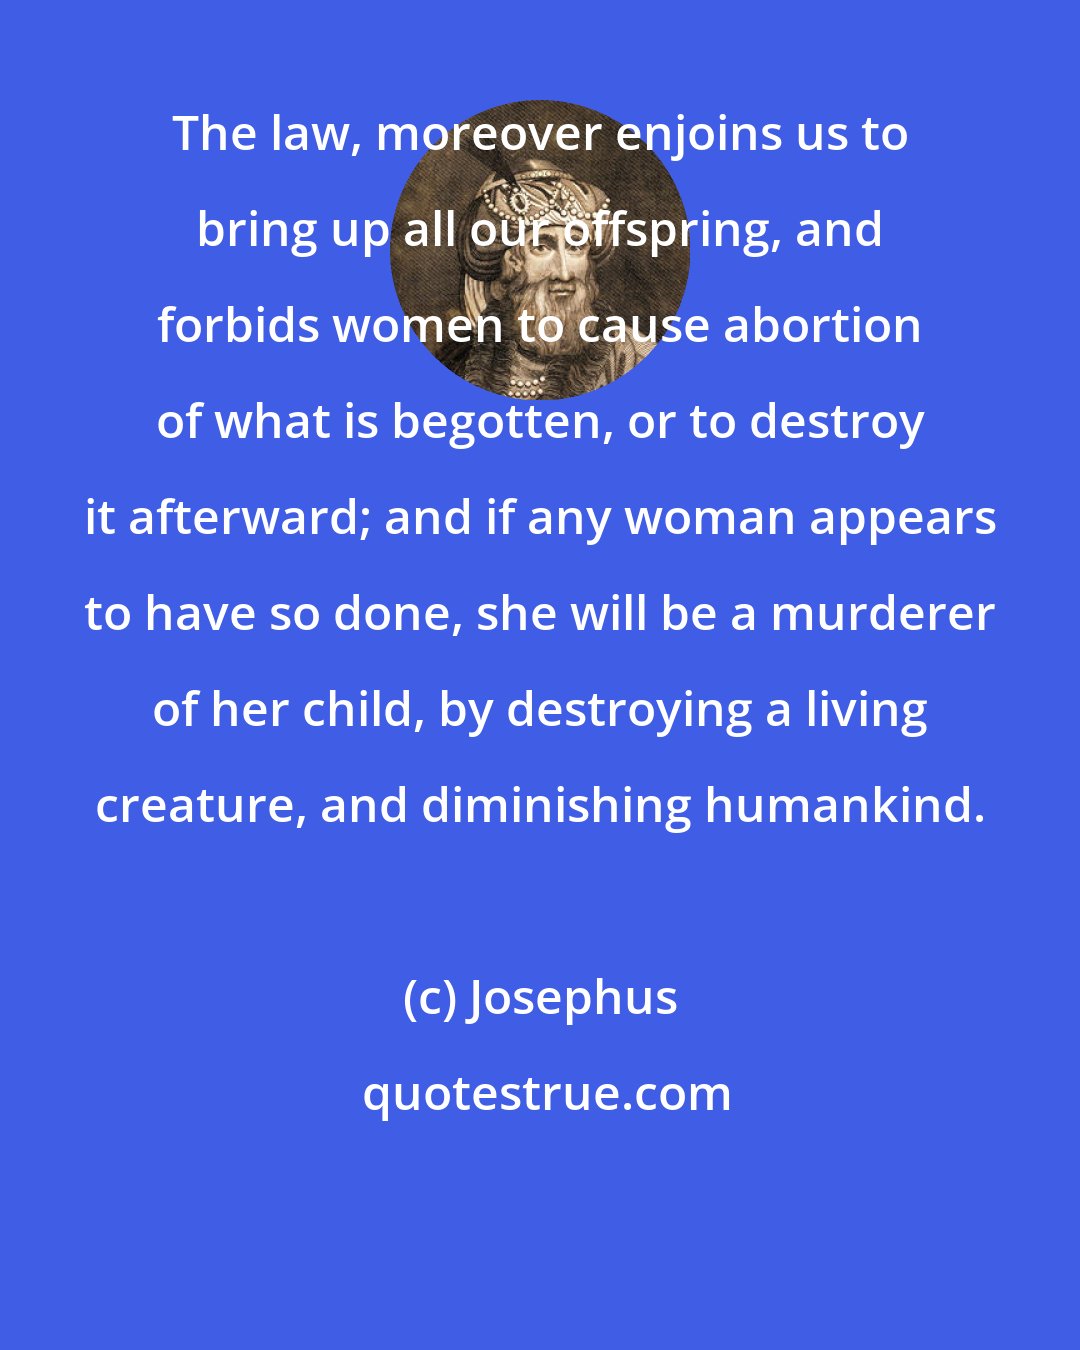 Josephus: The law, moreover enjoins us to bring up all our offspring, and forbids women to cause abortion of what is begotten, or to destroy it afterward; and if any woman appears to have so done, she will be a murderer of her child, by destroying a living creature, and diminishing humankind.